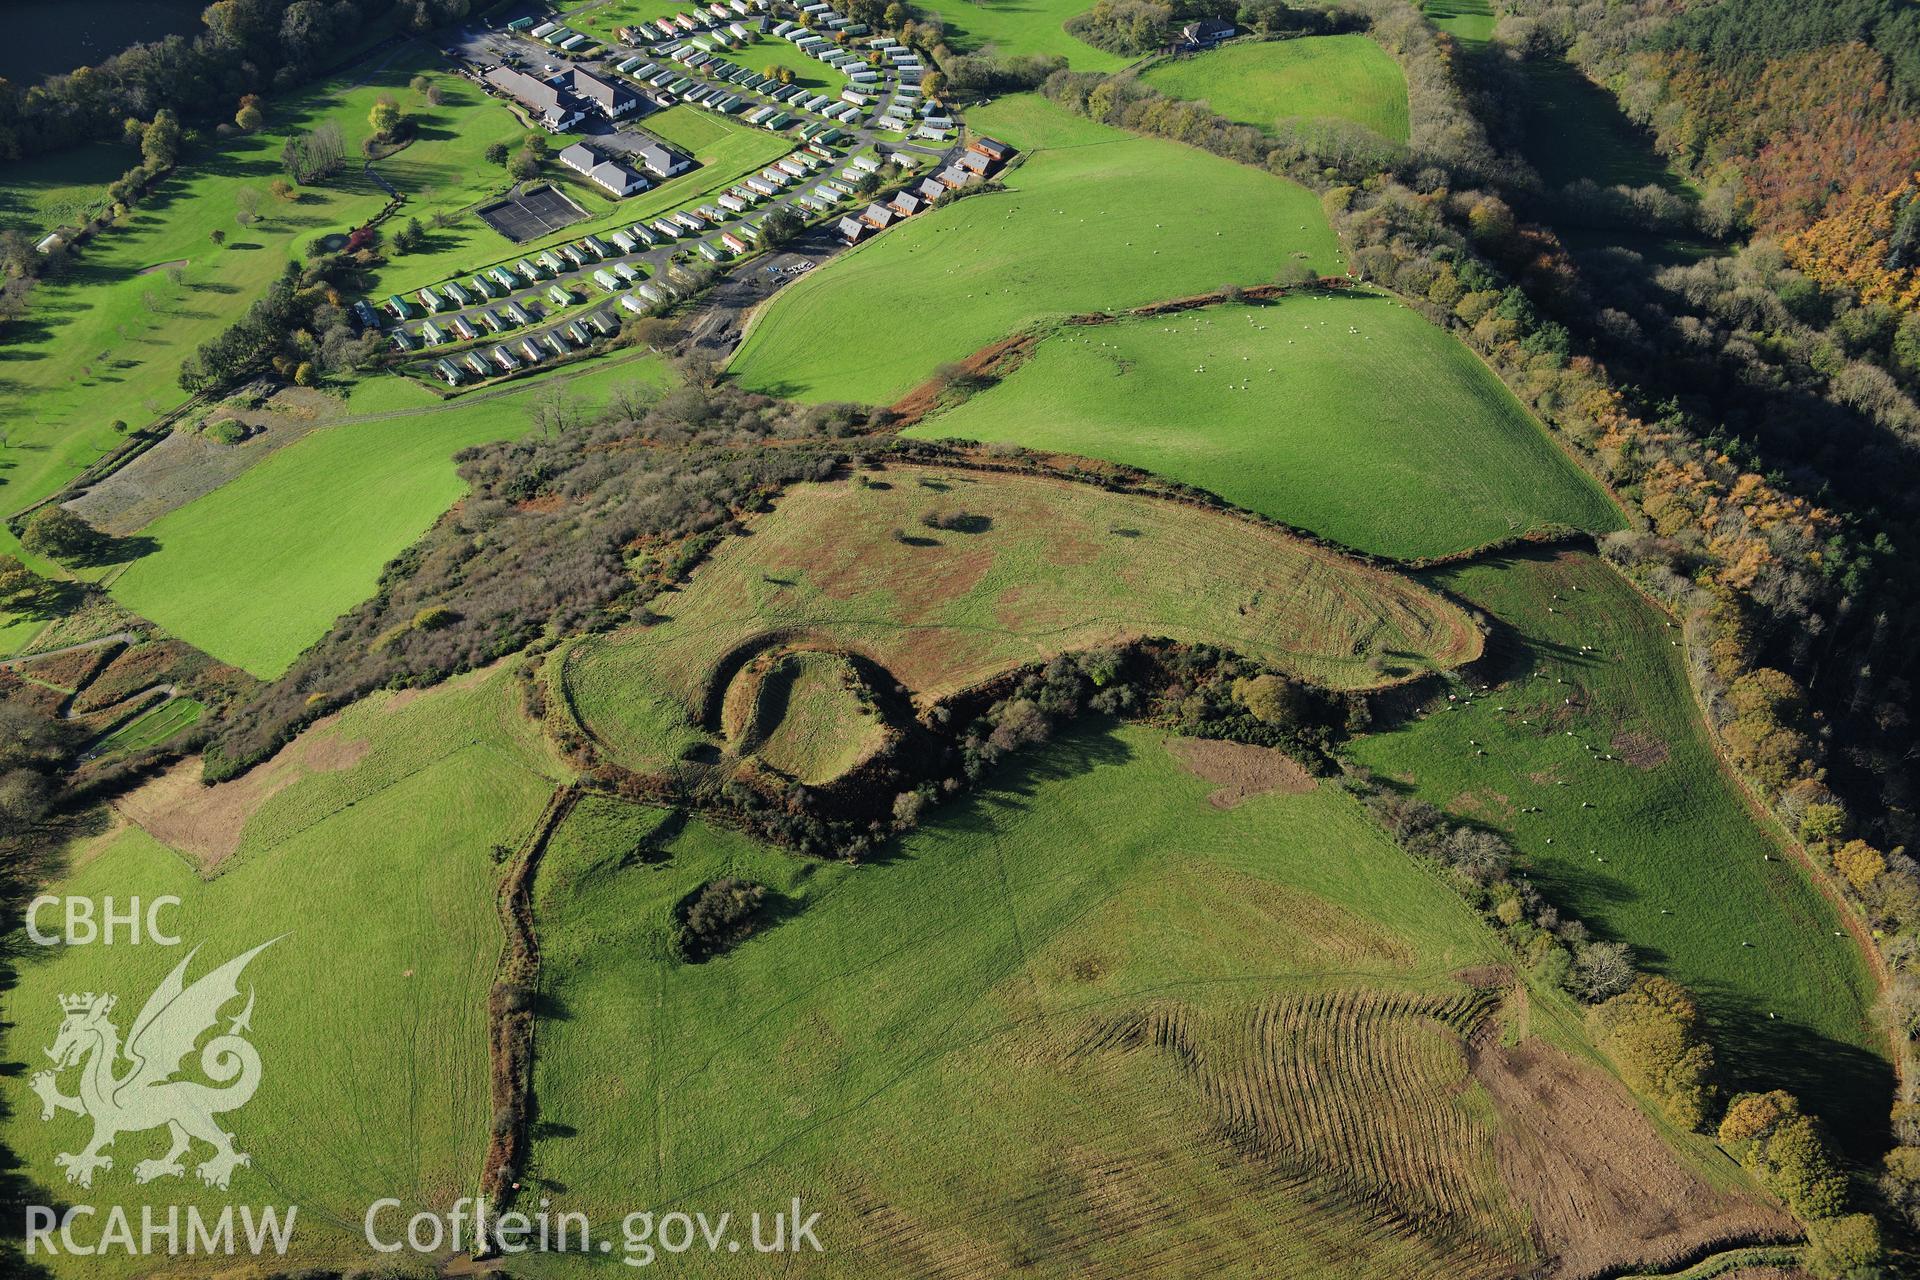 RCAHMW colour oblique photograph of Caer Penrhos hillfort and castle. Taken by Toby Driver on 05/11/2012.